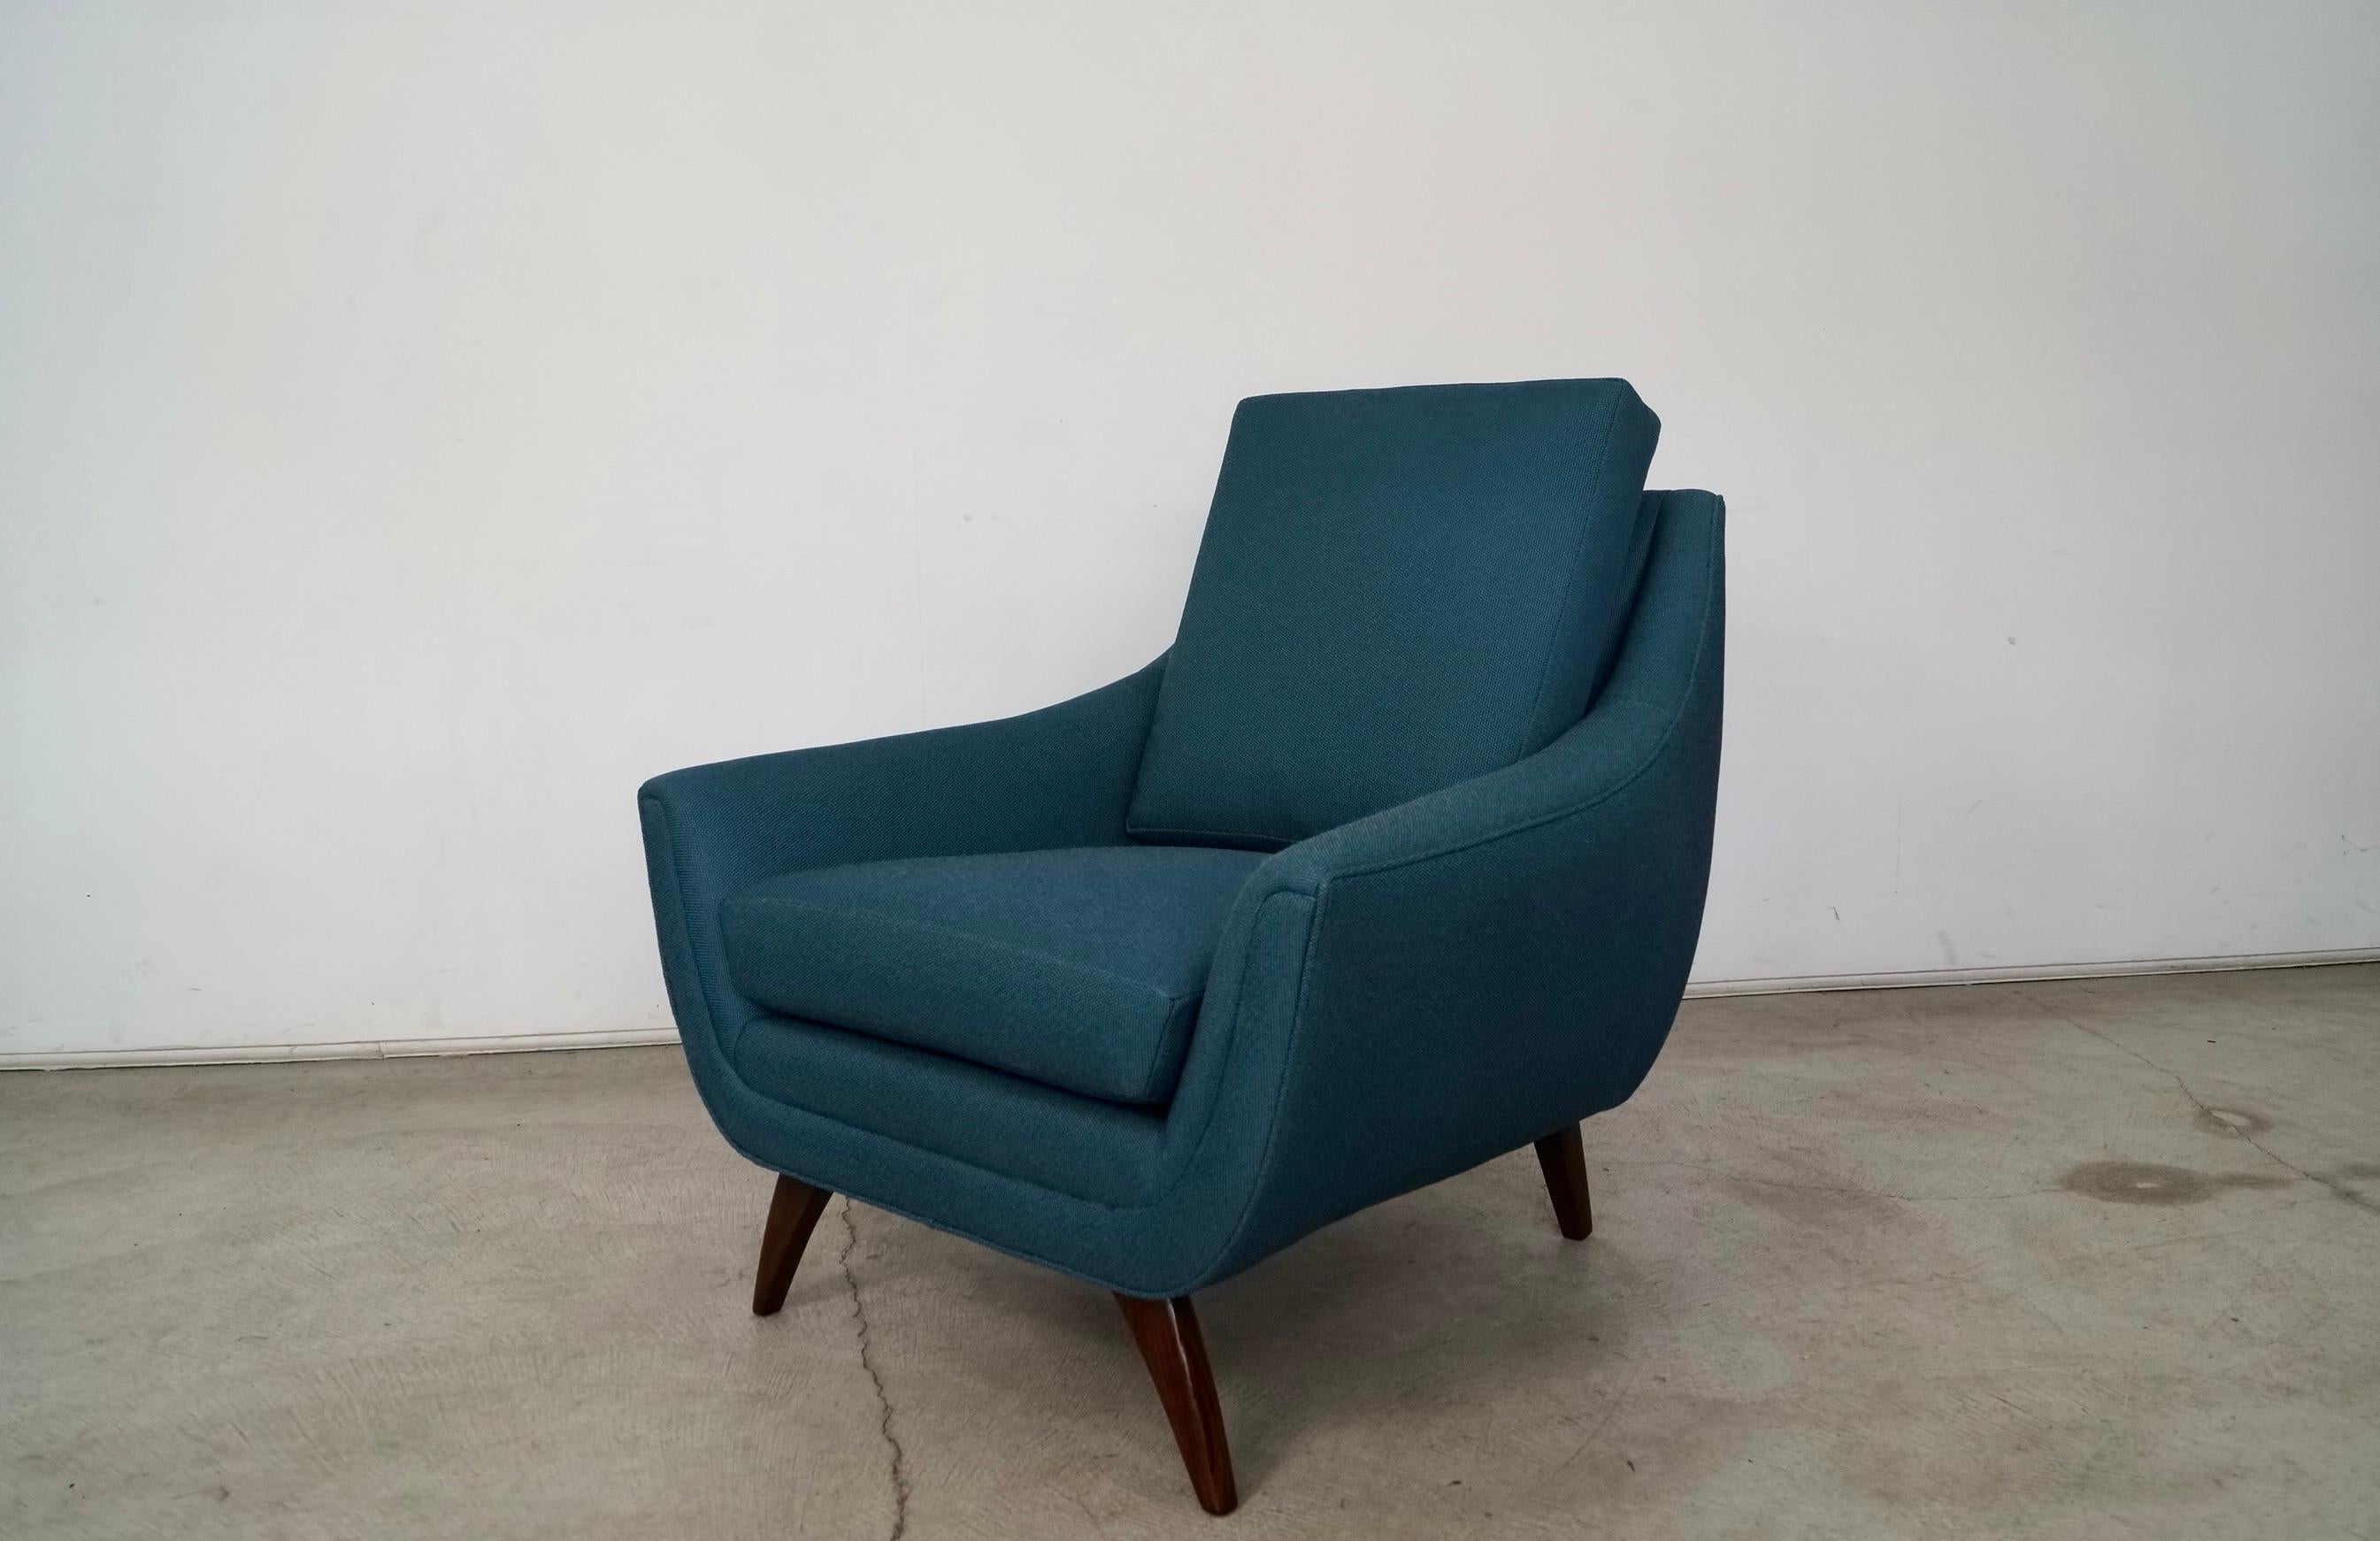 1960's Mid-Century Modern Adrian Pearsall Style Prestige Gondola Lounge Chair In Good Condition For Sale In Burbank, CA